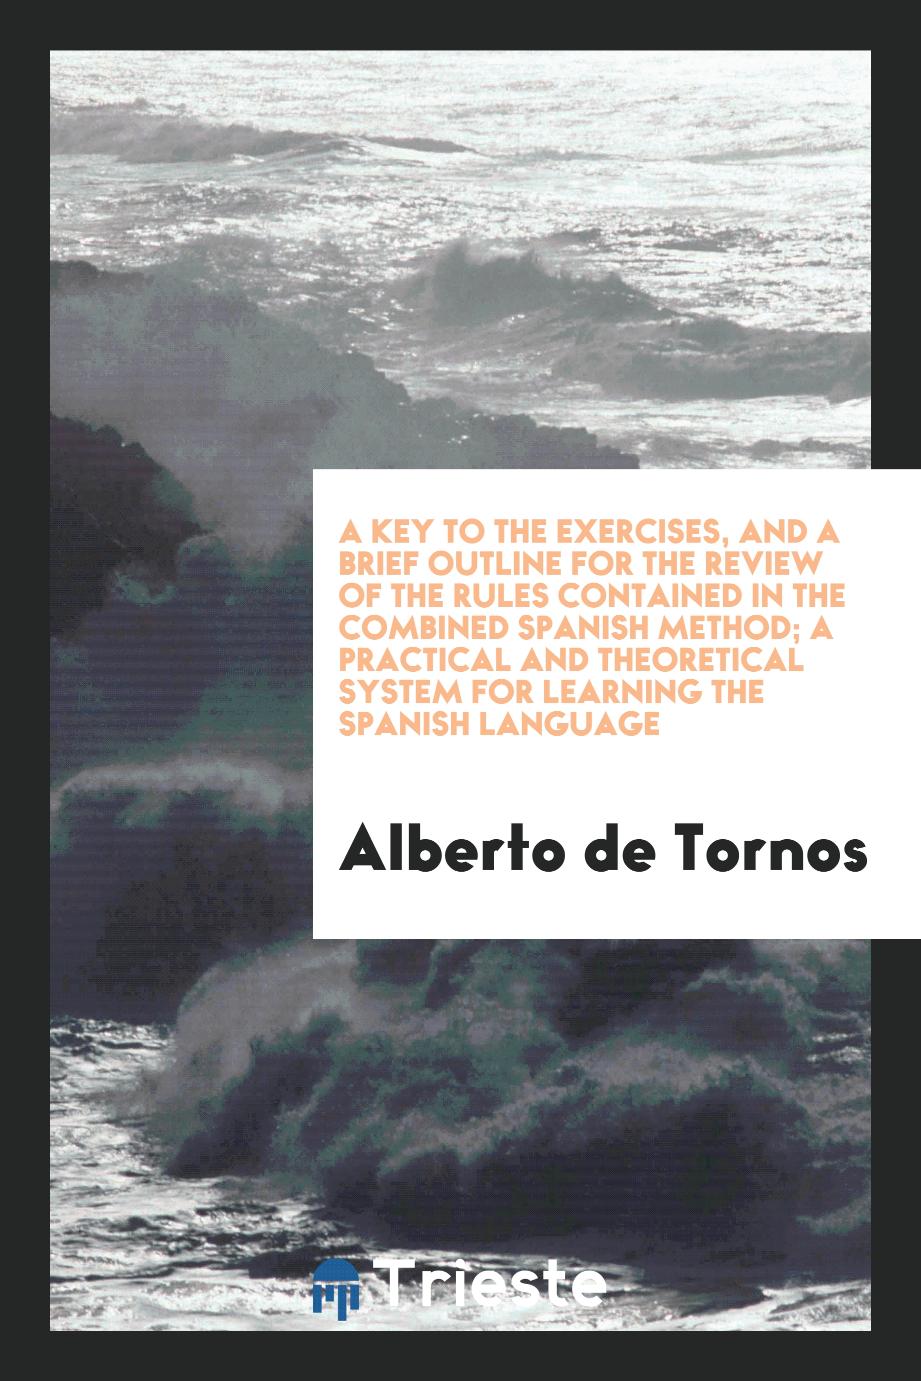 A Key to the Exercises, and a Brief Outline for the Review of the Rules Contained in the Combined Spanish Method; A Practical and Theoretical System for Learning the Spanish Language